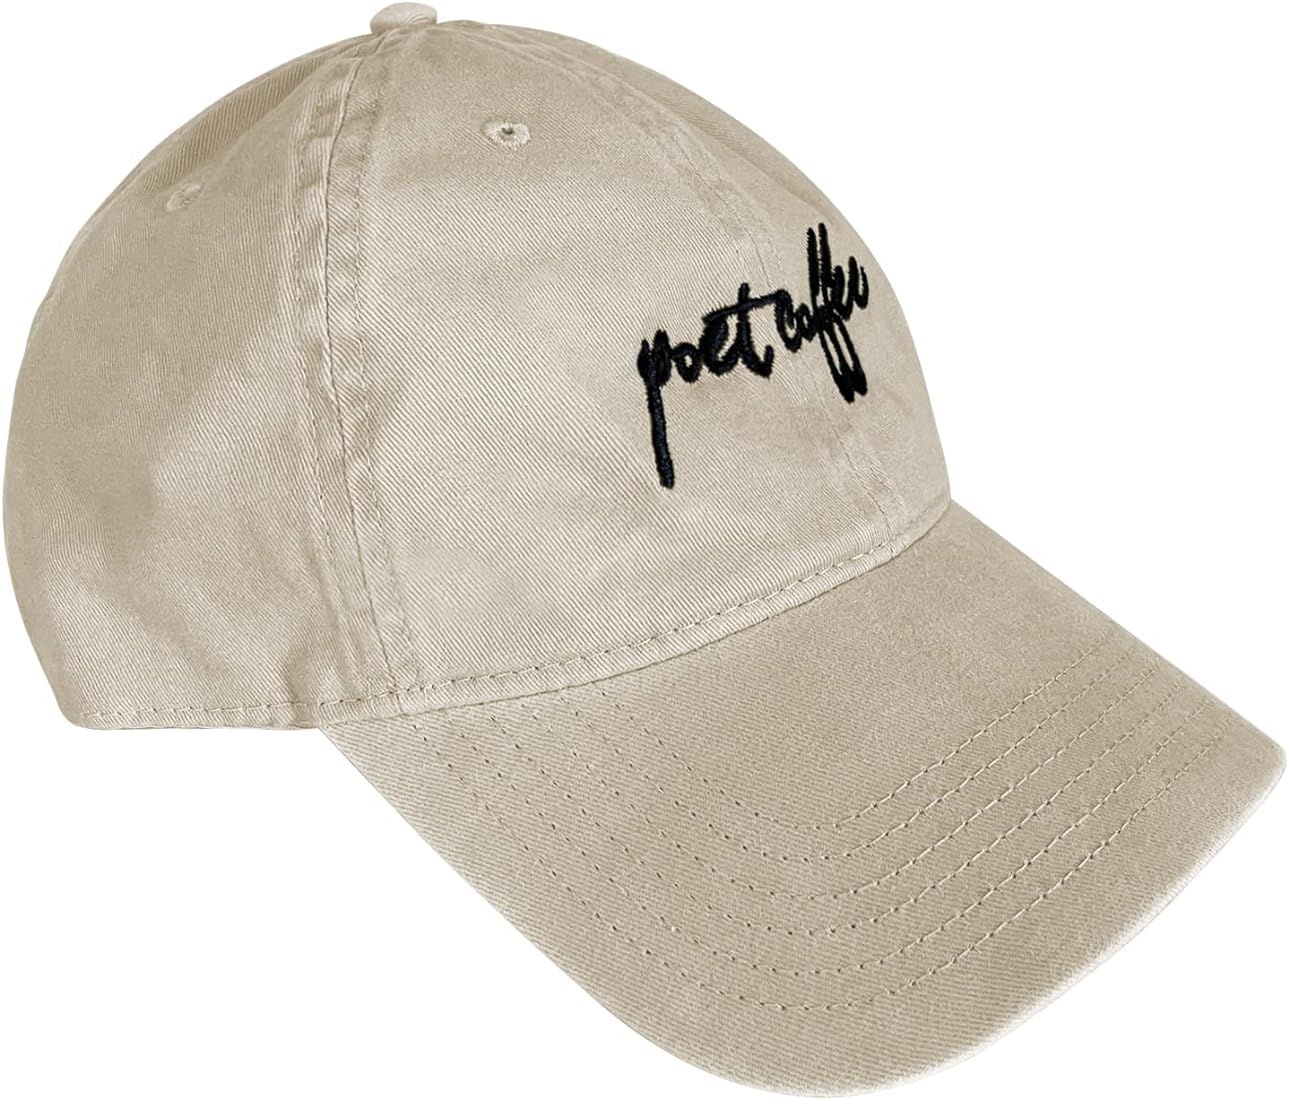 Atticus Poetry-Poet Coffee Dad Hat, Embroidered and Garment Washed, Cotton Twill Baseball Cap, | Amazon (US)